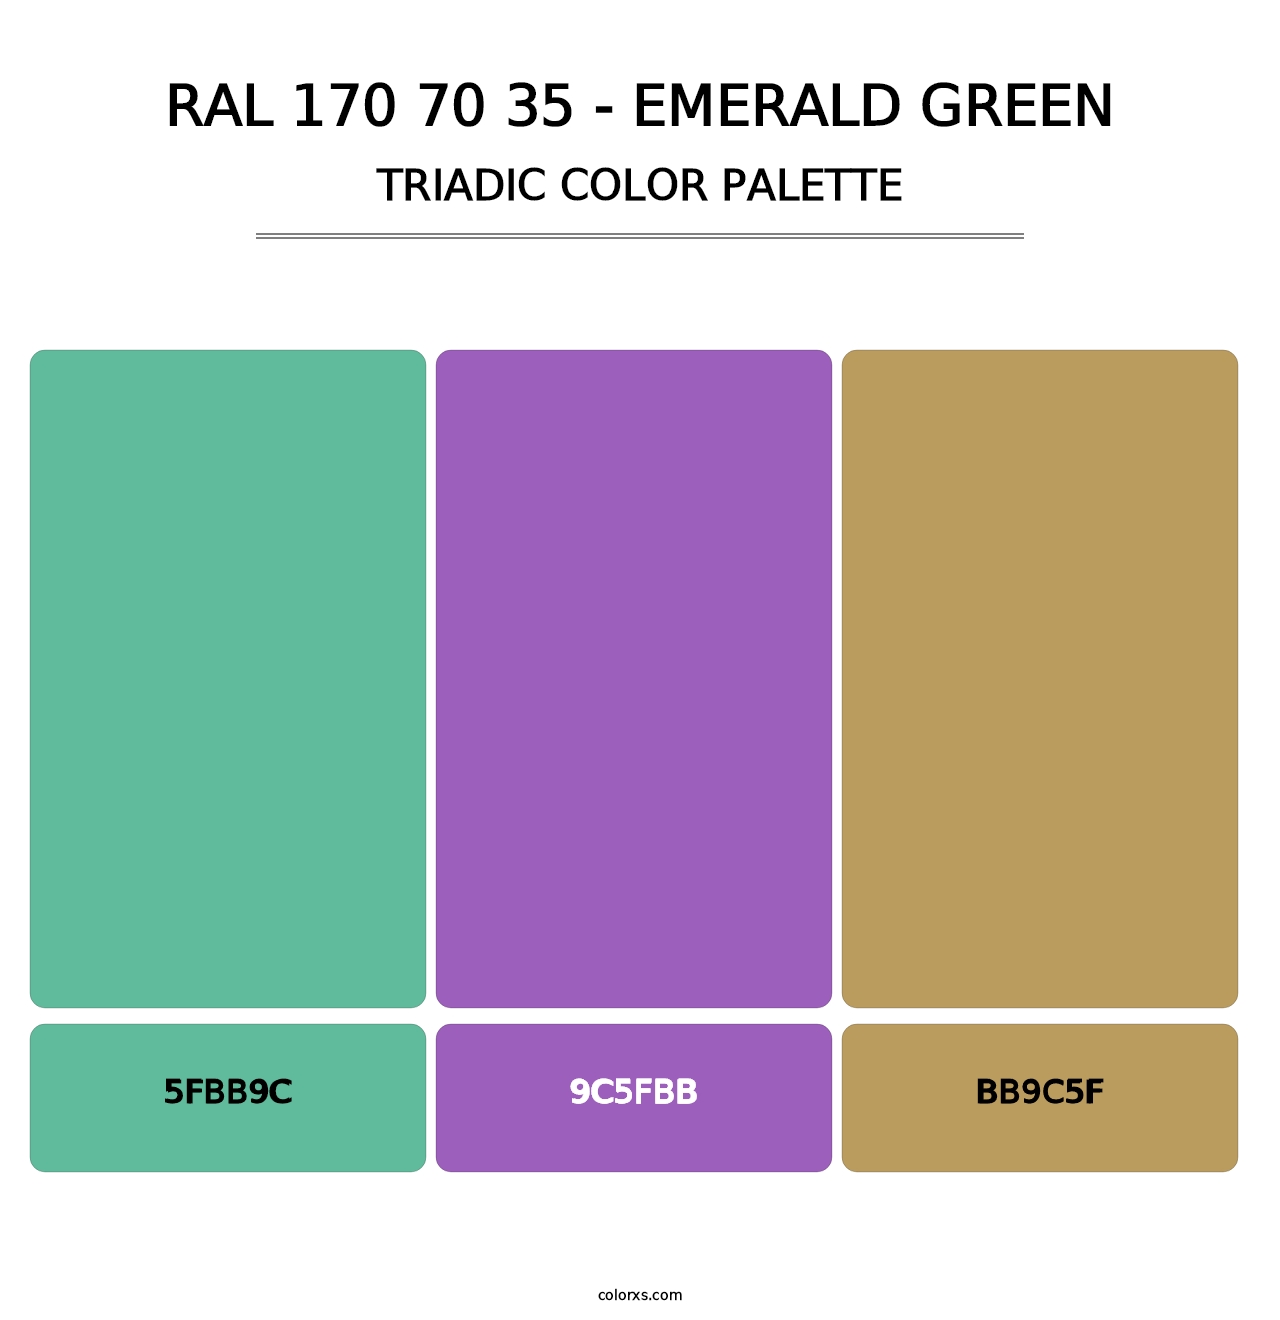 RAL 170 70 35 - Emerald Green - Triadic Color Palette